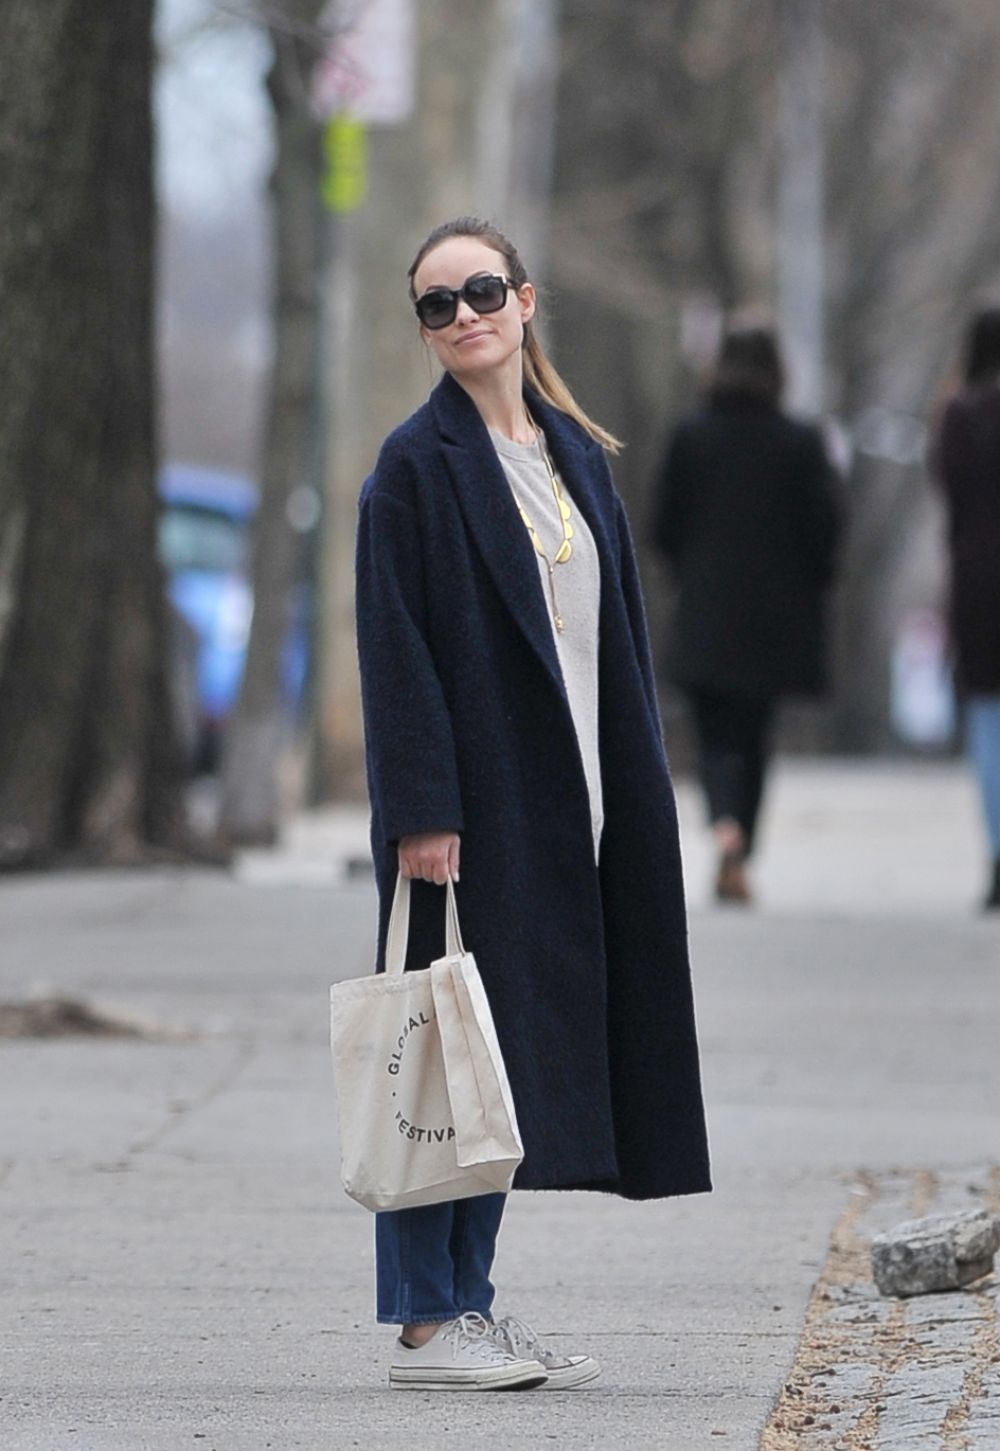 OLIVIA WILDE Out and About in Brooklyn 03/13/2016 – HawtCelebs